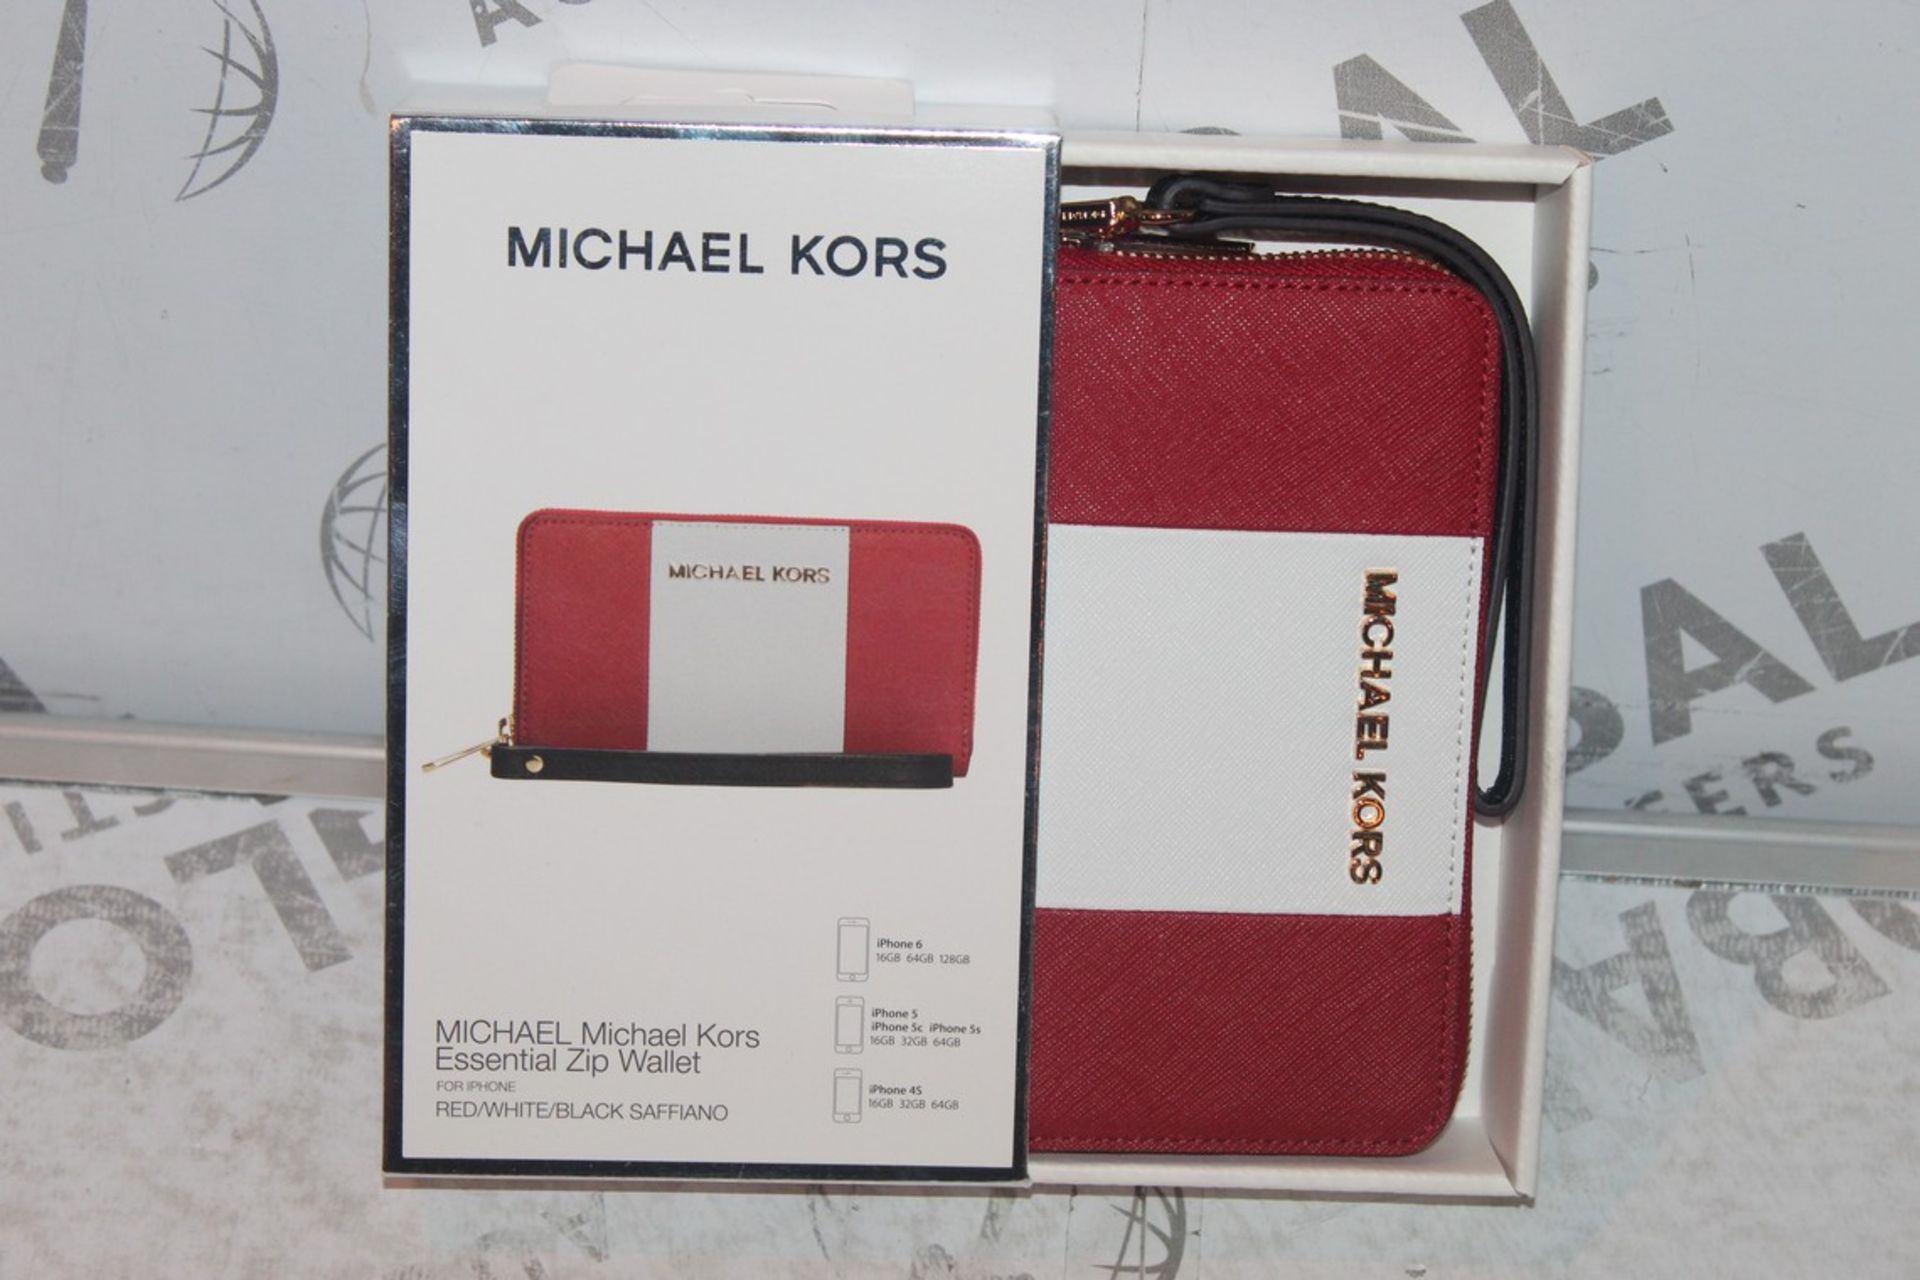 Lot to Contain 2 Boxed, Michael Kors, red White and Black, Saffiano Multi Function, Zip essential